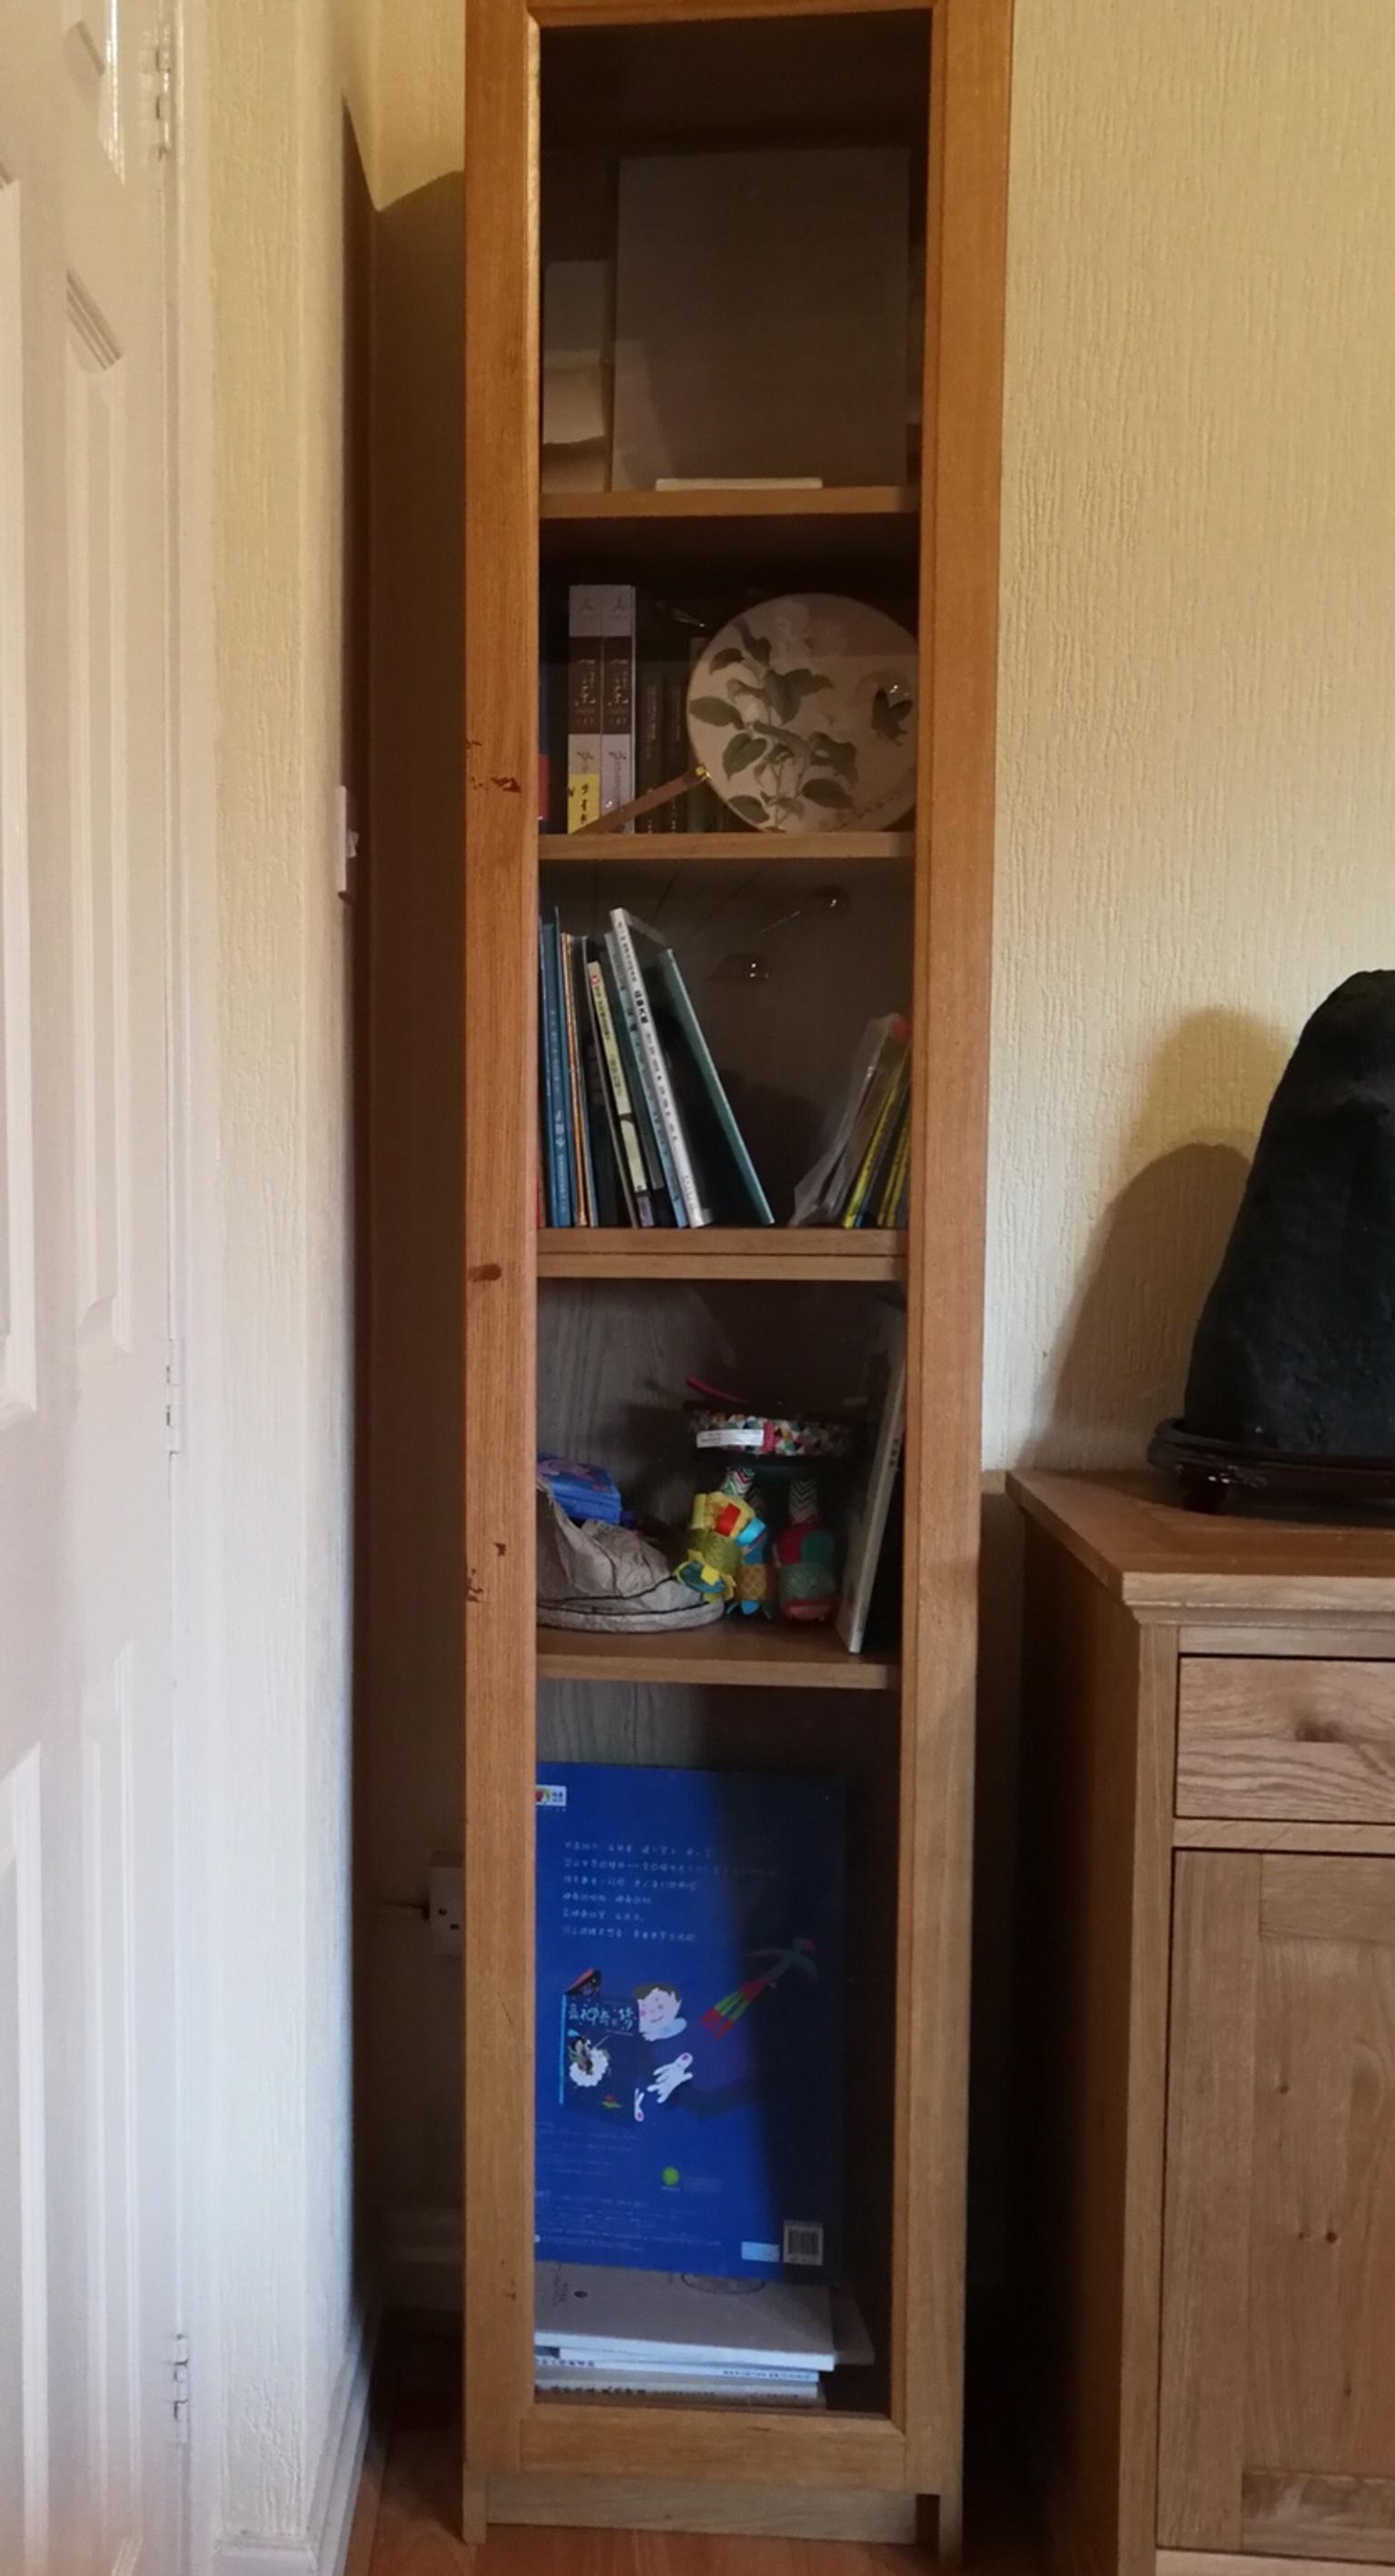 Ikea Wood Bookcase With Glass Door In Wa3 Croft For 20 00 For